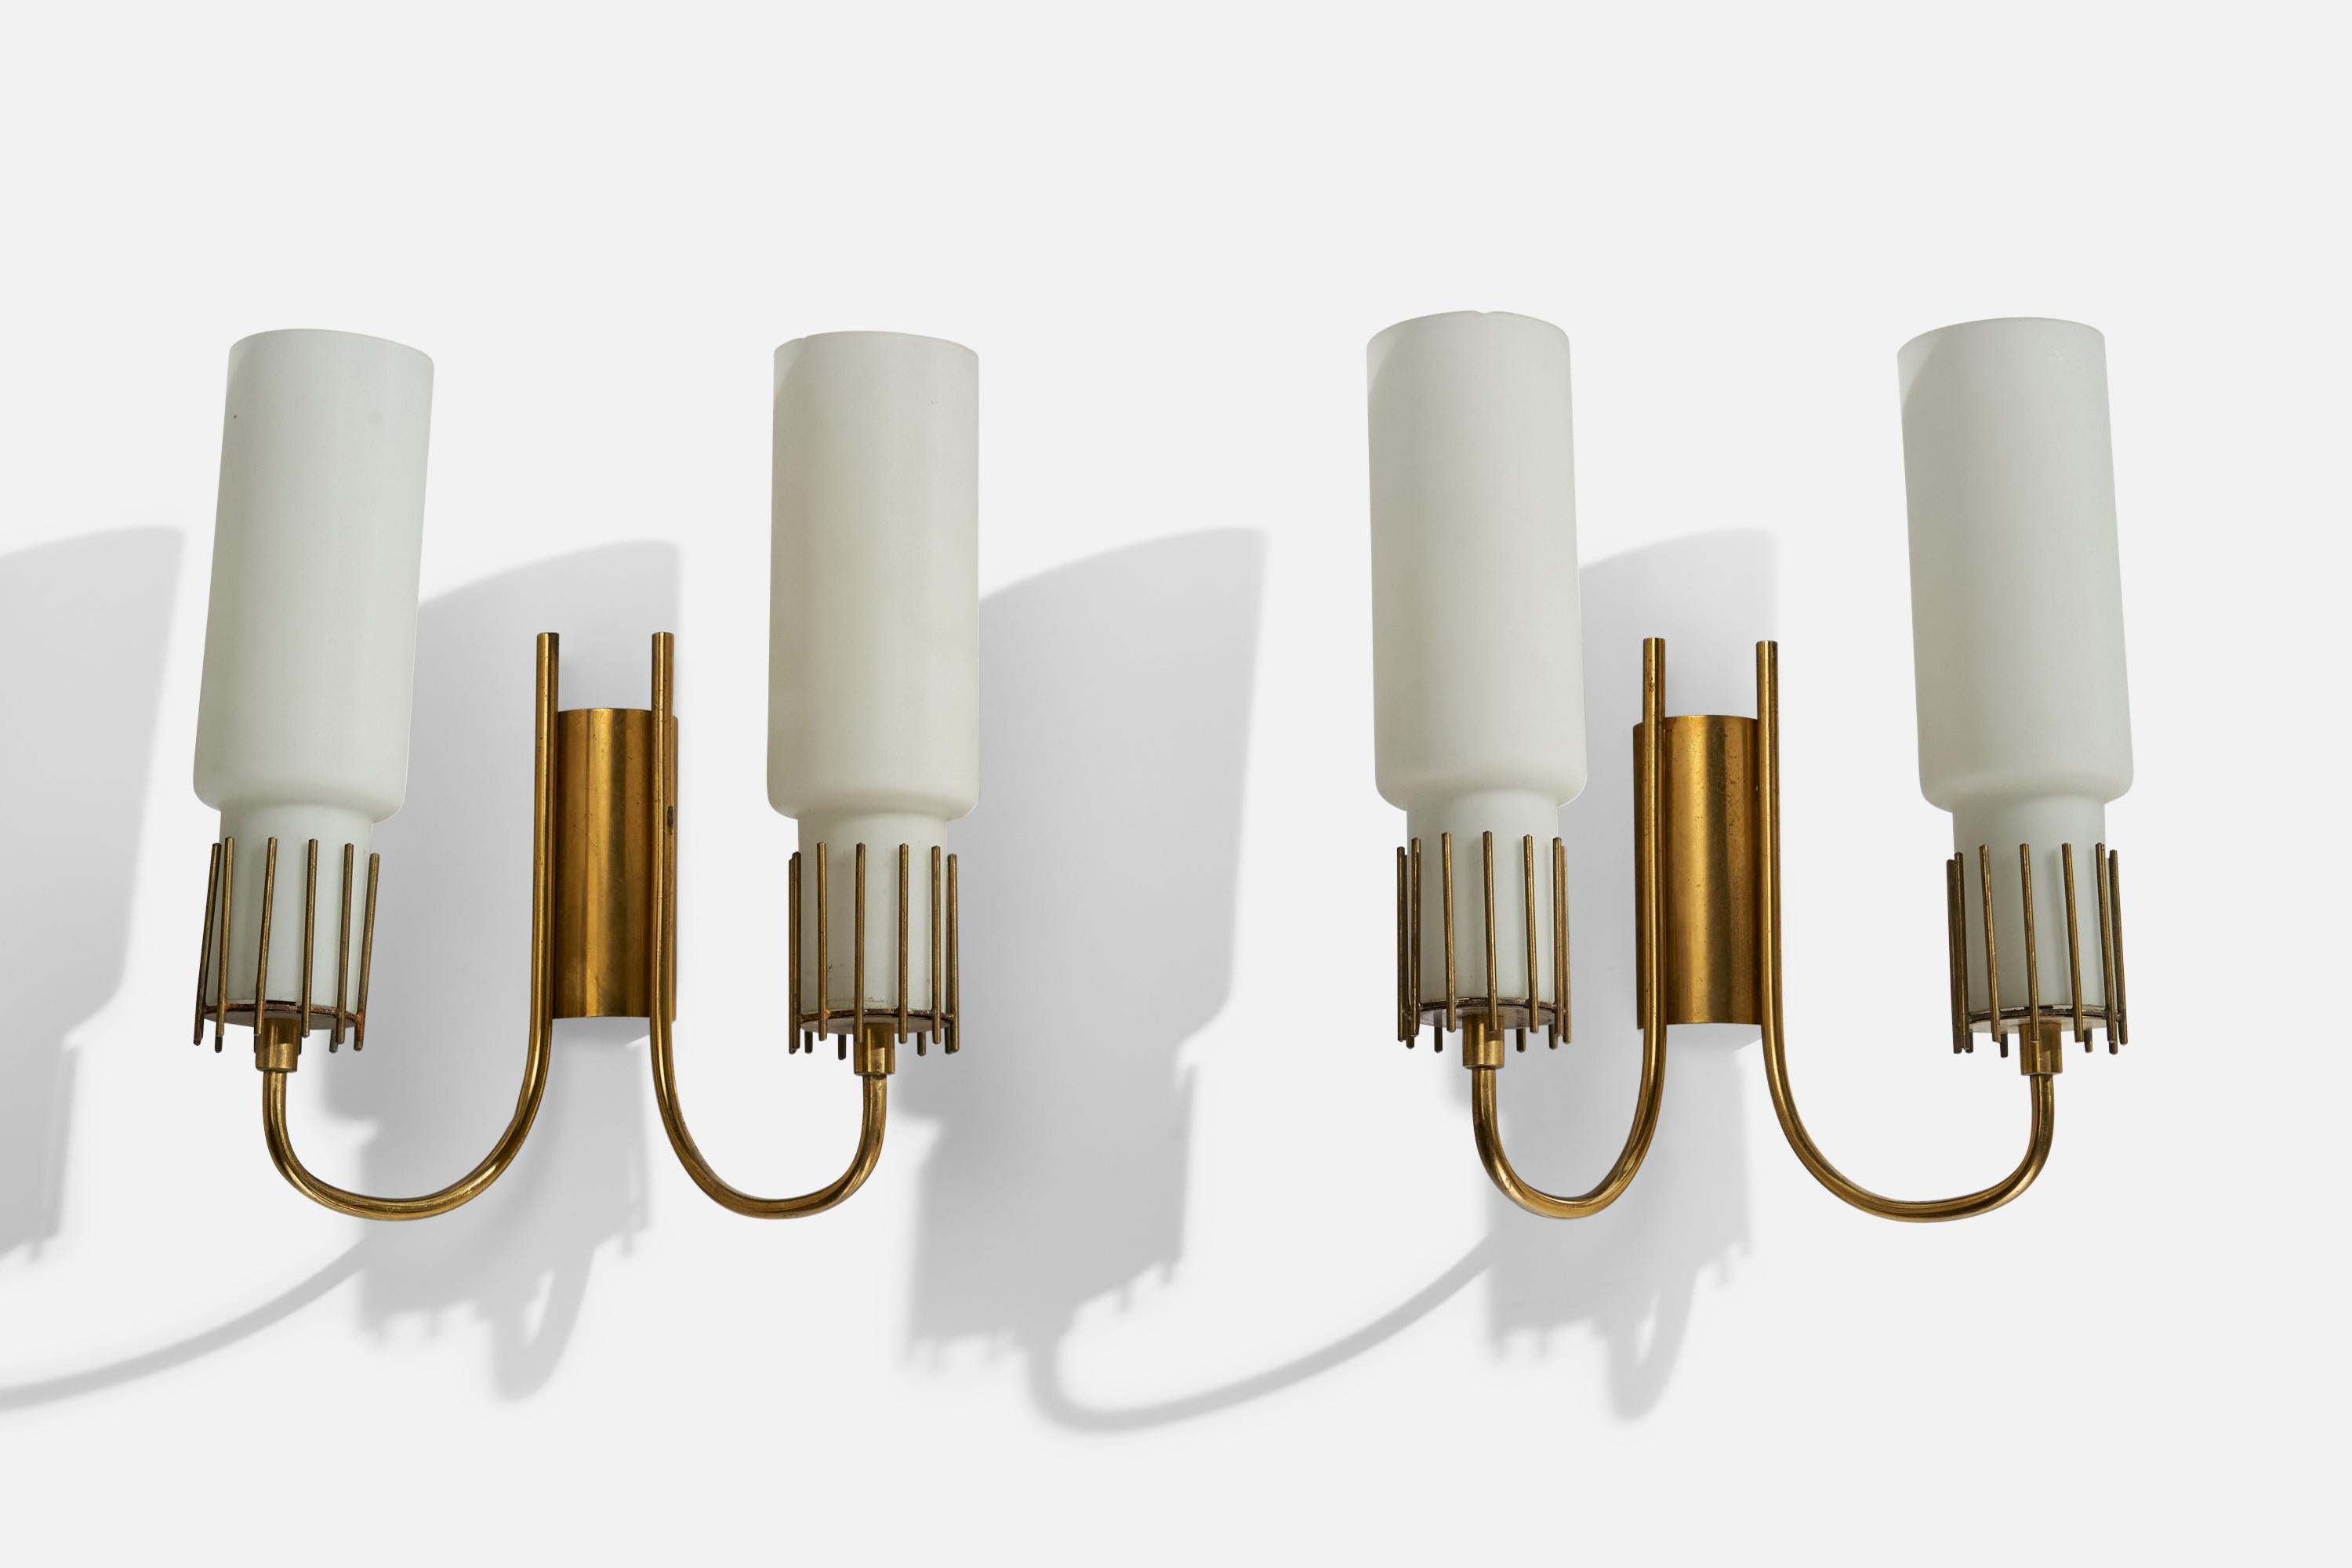 A pair of brass and opaline glass wall lights designed and produced in Italy, 1950s.

Overall Dimensions (inches): 11.6”  H x 10.25” W x 5.25” D
Back Plate Dimensions (inches): 4.25”  H x 1.95” W x 1”D
Bulb Specifications: E-14 Bulb
Number of